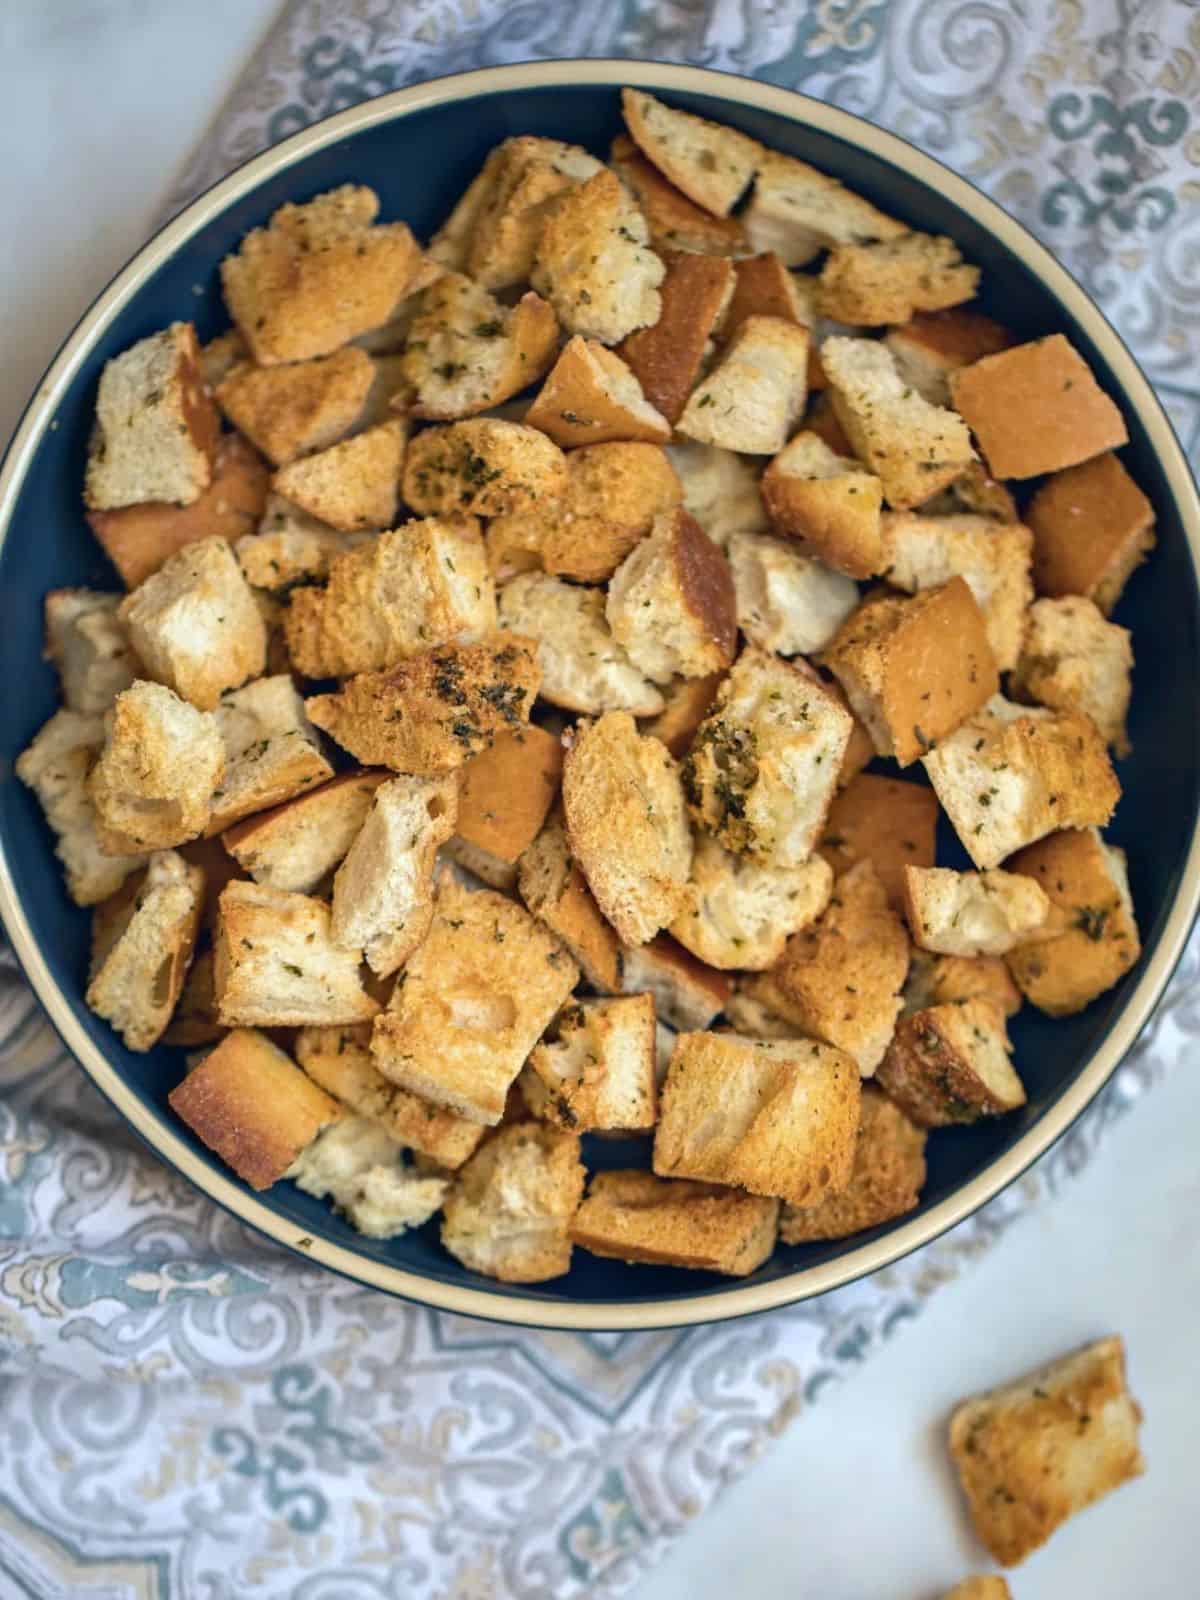 Bowl of Homemade Croutons on counter.